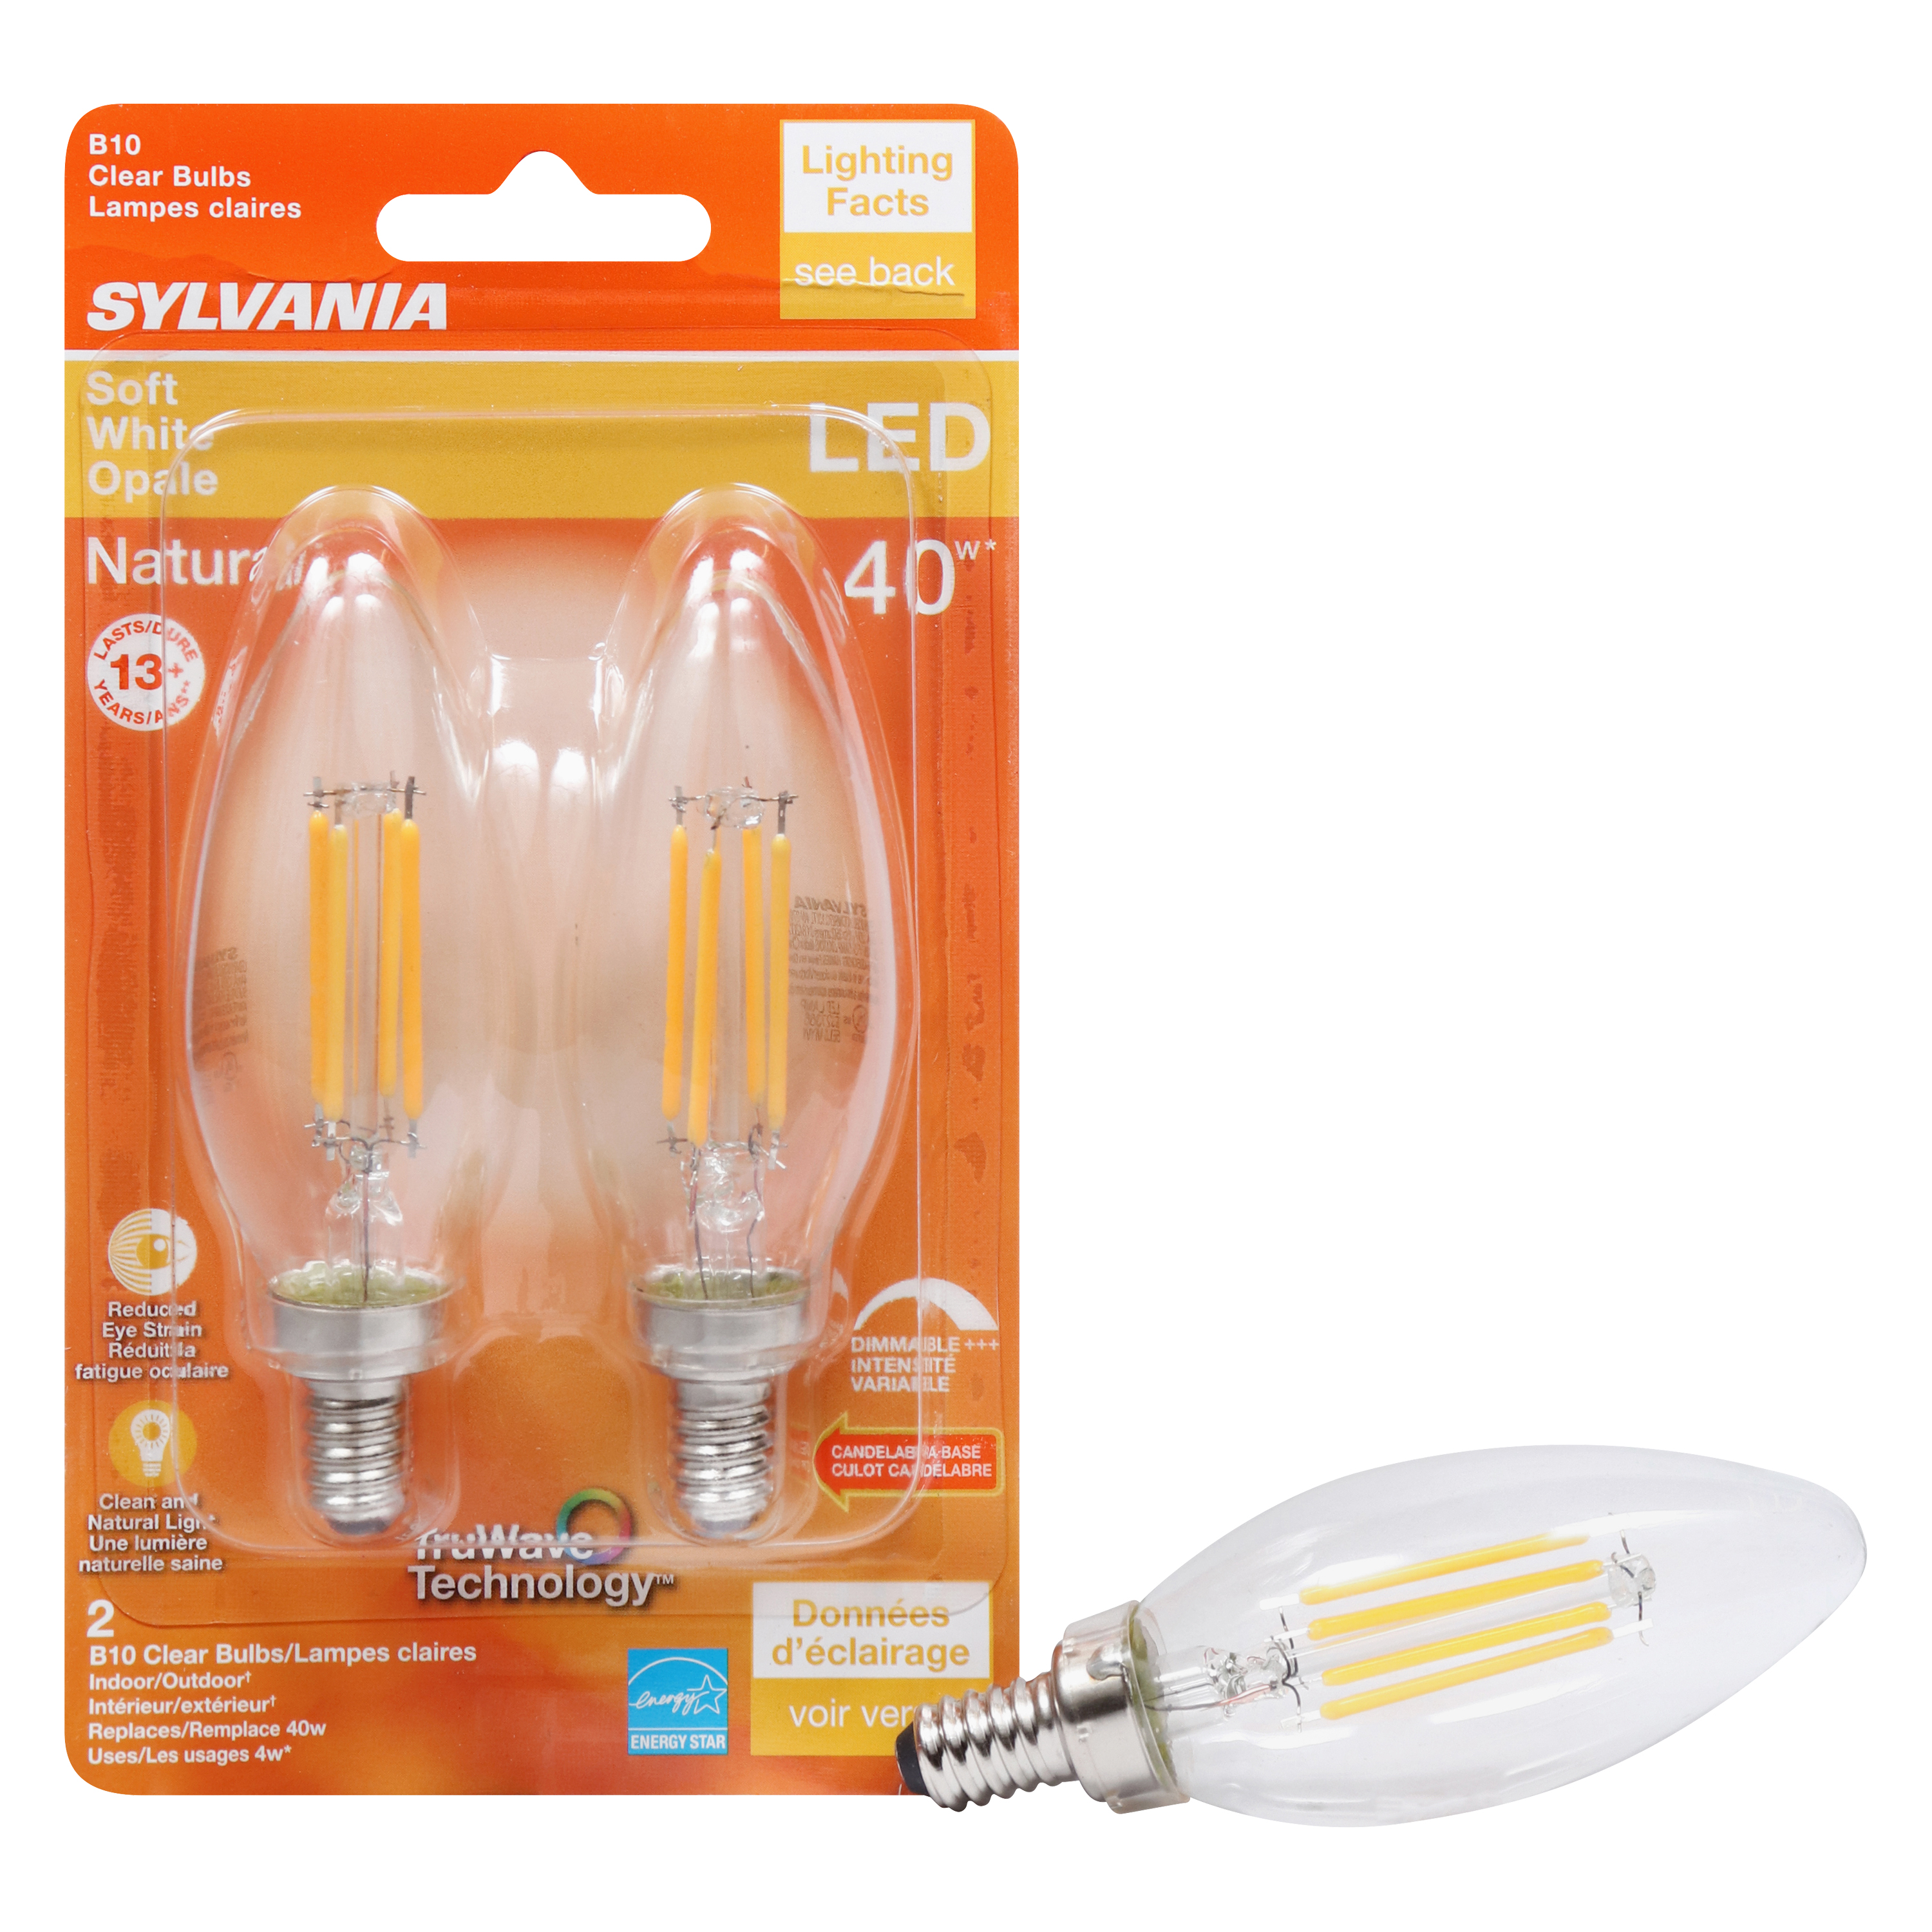 Sylvania 40794 Natural LED Bulb, Decorative, B10 Blunt Tip Lamp, 40 W Equivalent, E12 Lamp Base, Dimmable, Clear